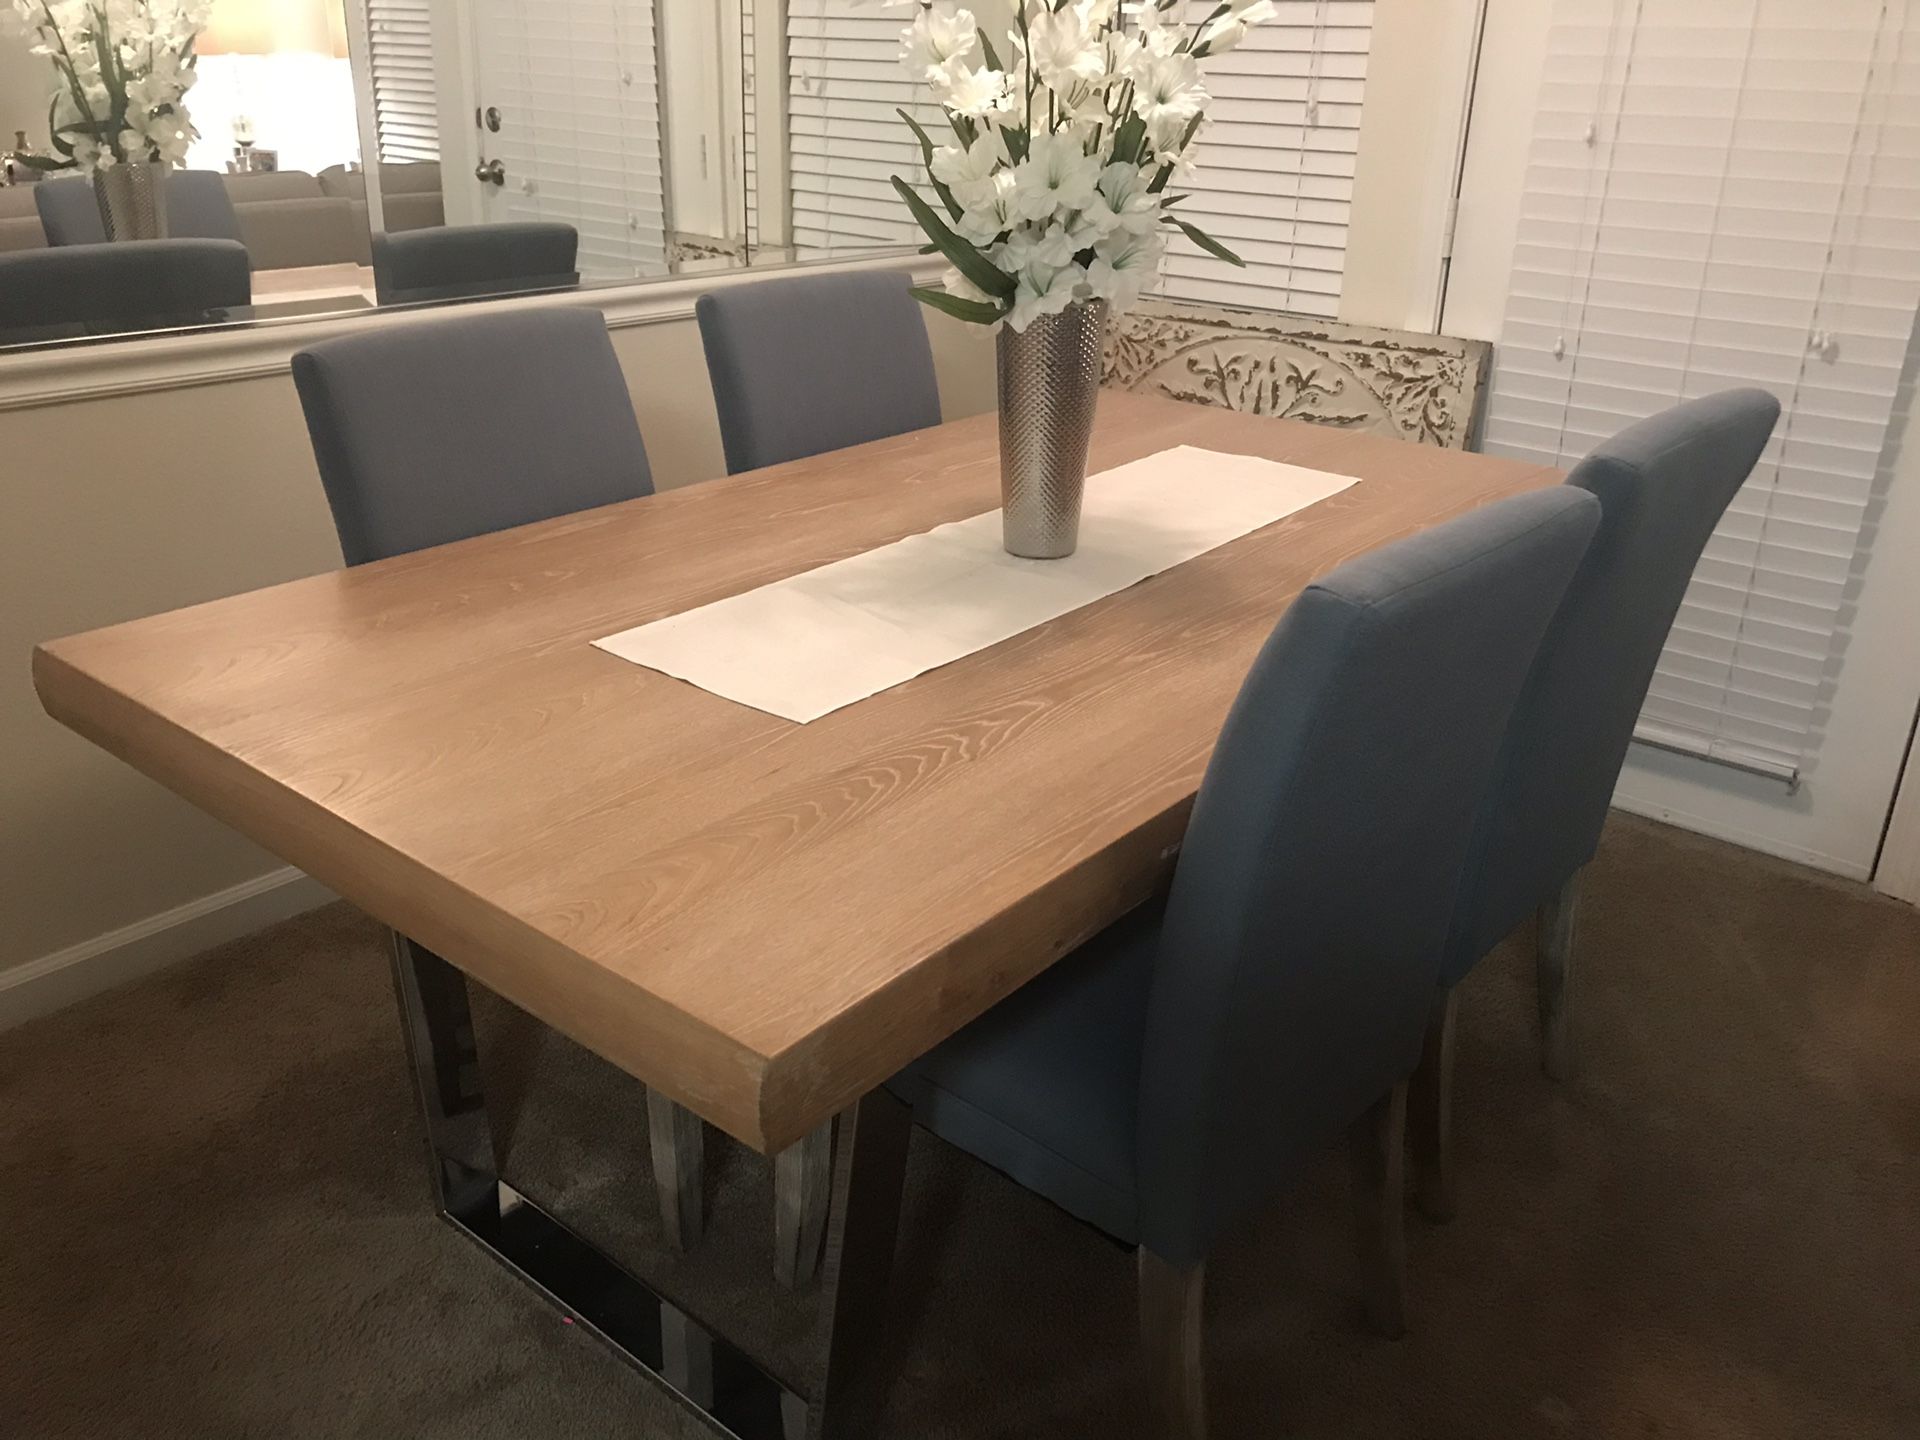 Dining Room Table and Chairs for Sale!